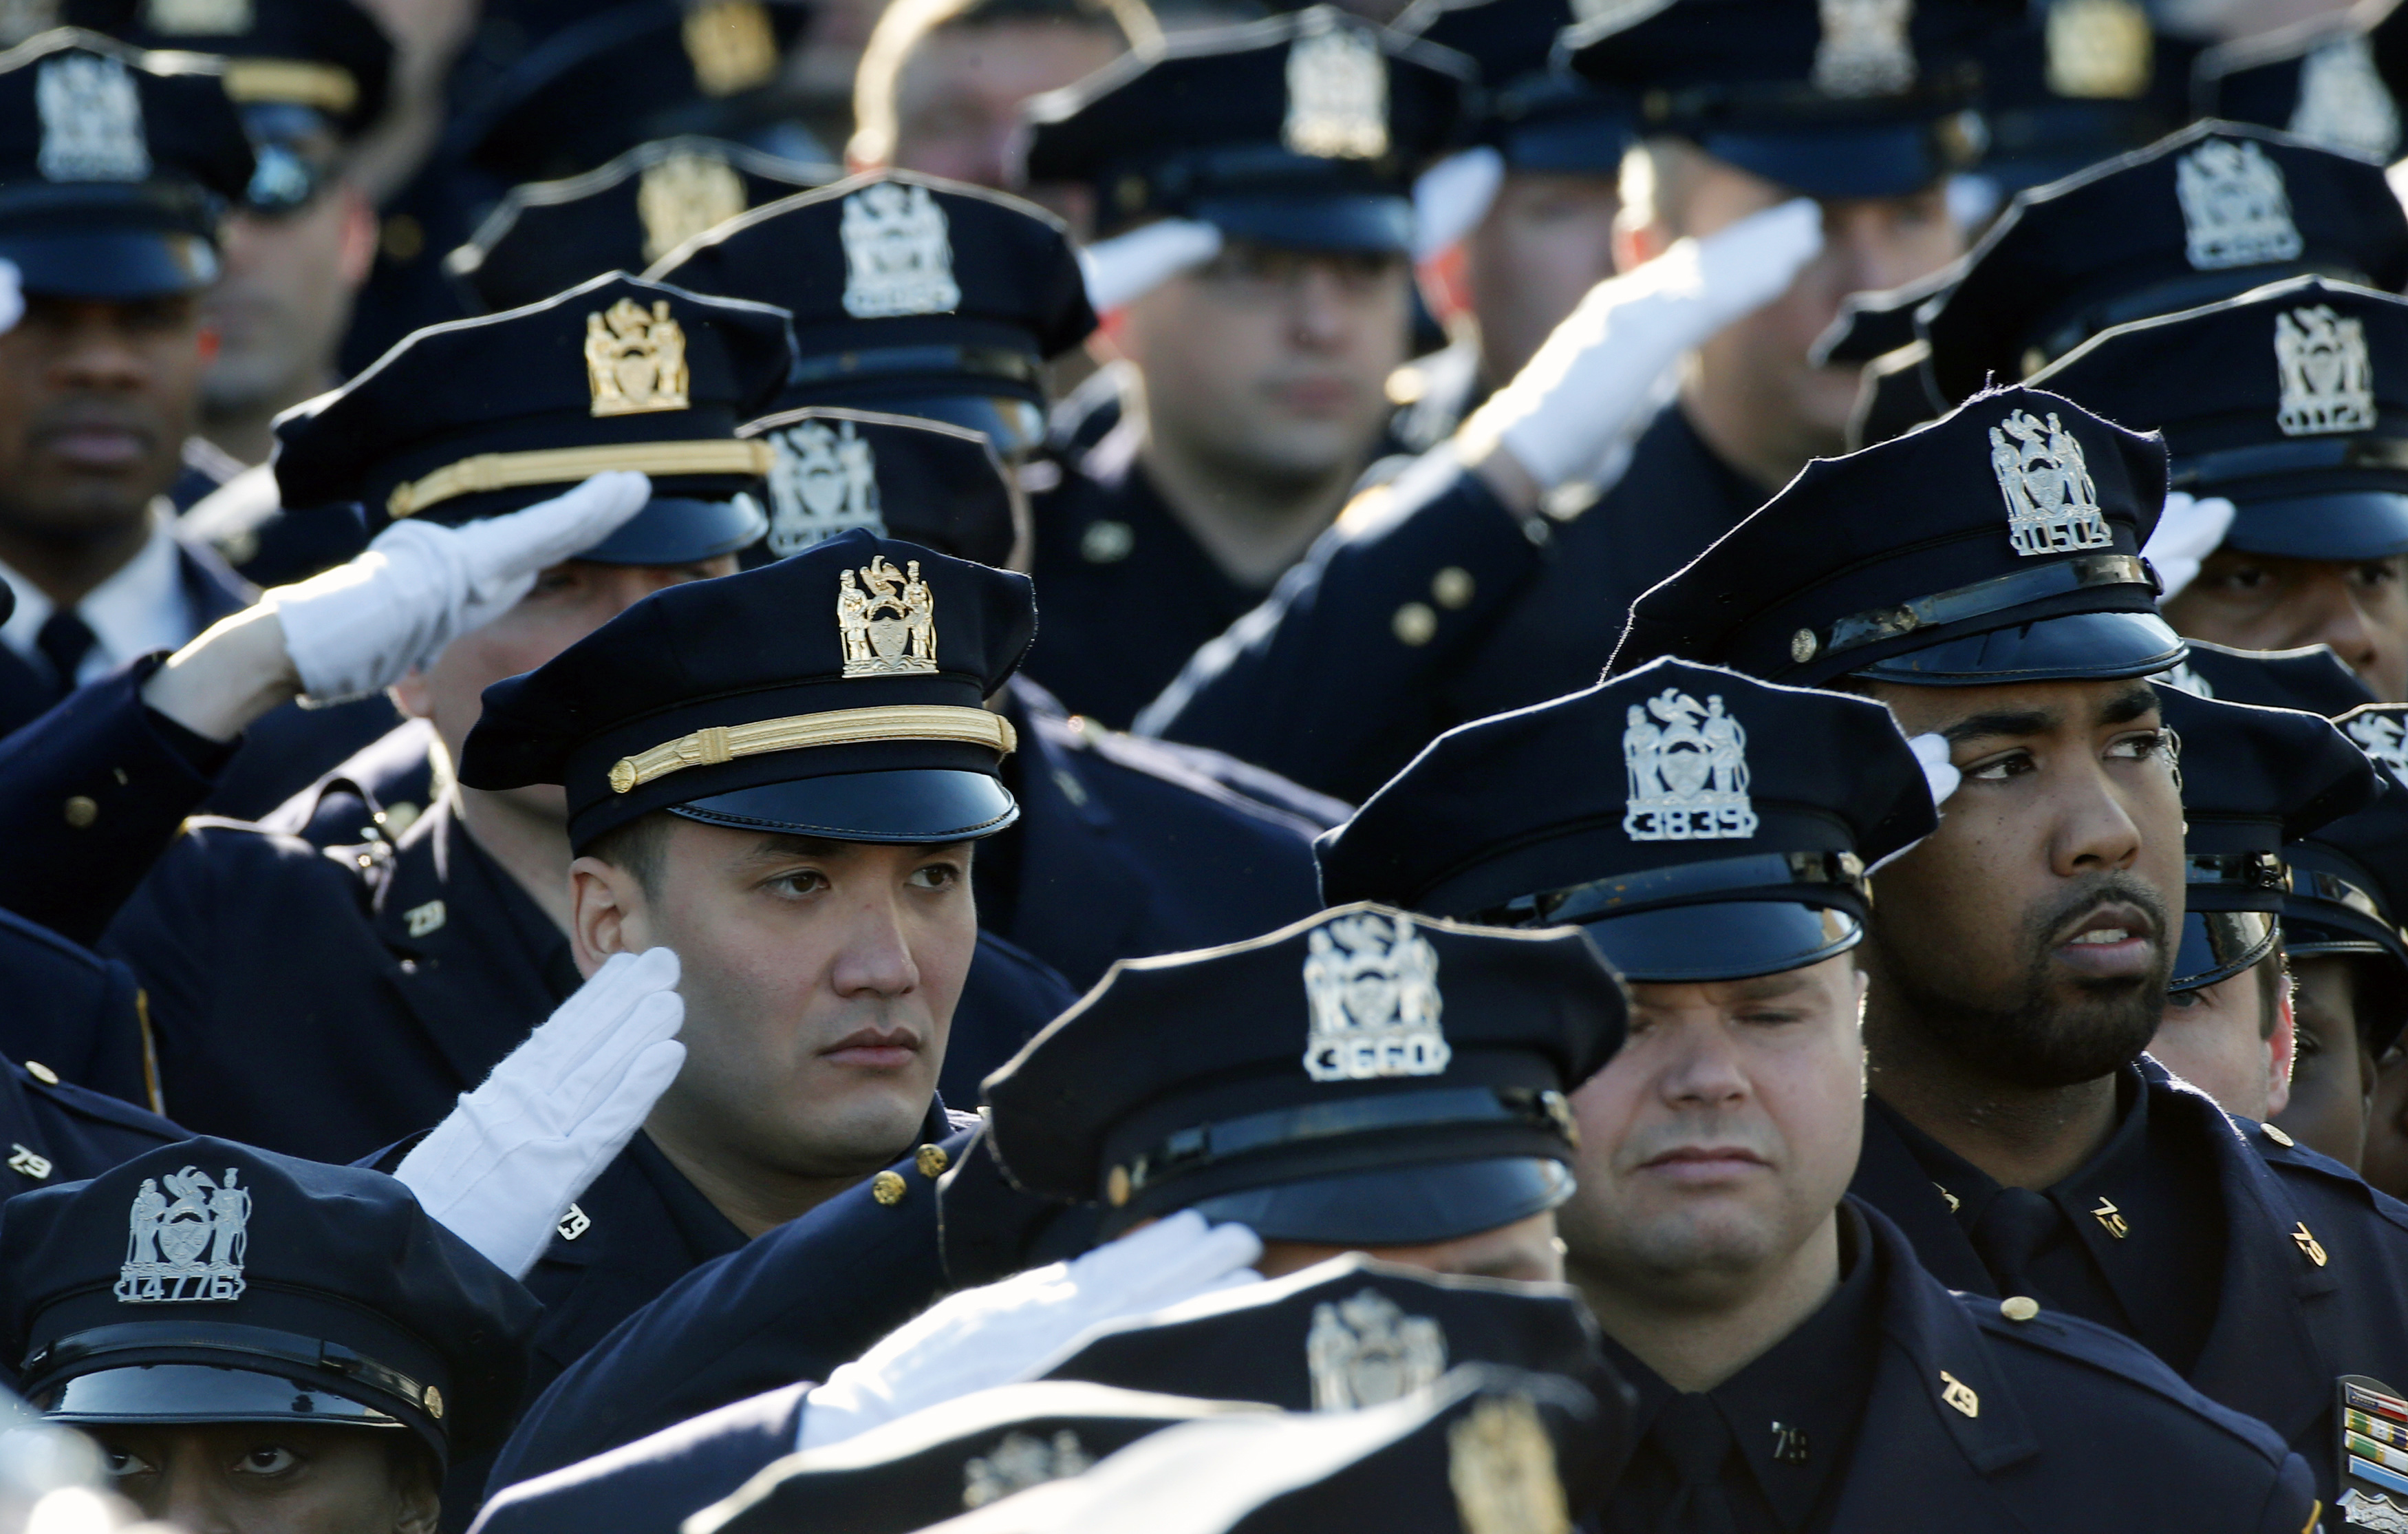 Police salute during the playing of the U.S. national anthem outside the Christ Tabernacle Church in New York City at the start of the funeral service for slain New York Police Department officer Rafael Ramos on Dec. 27, 2014 (© Mike Segar— Reuters)